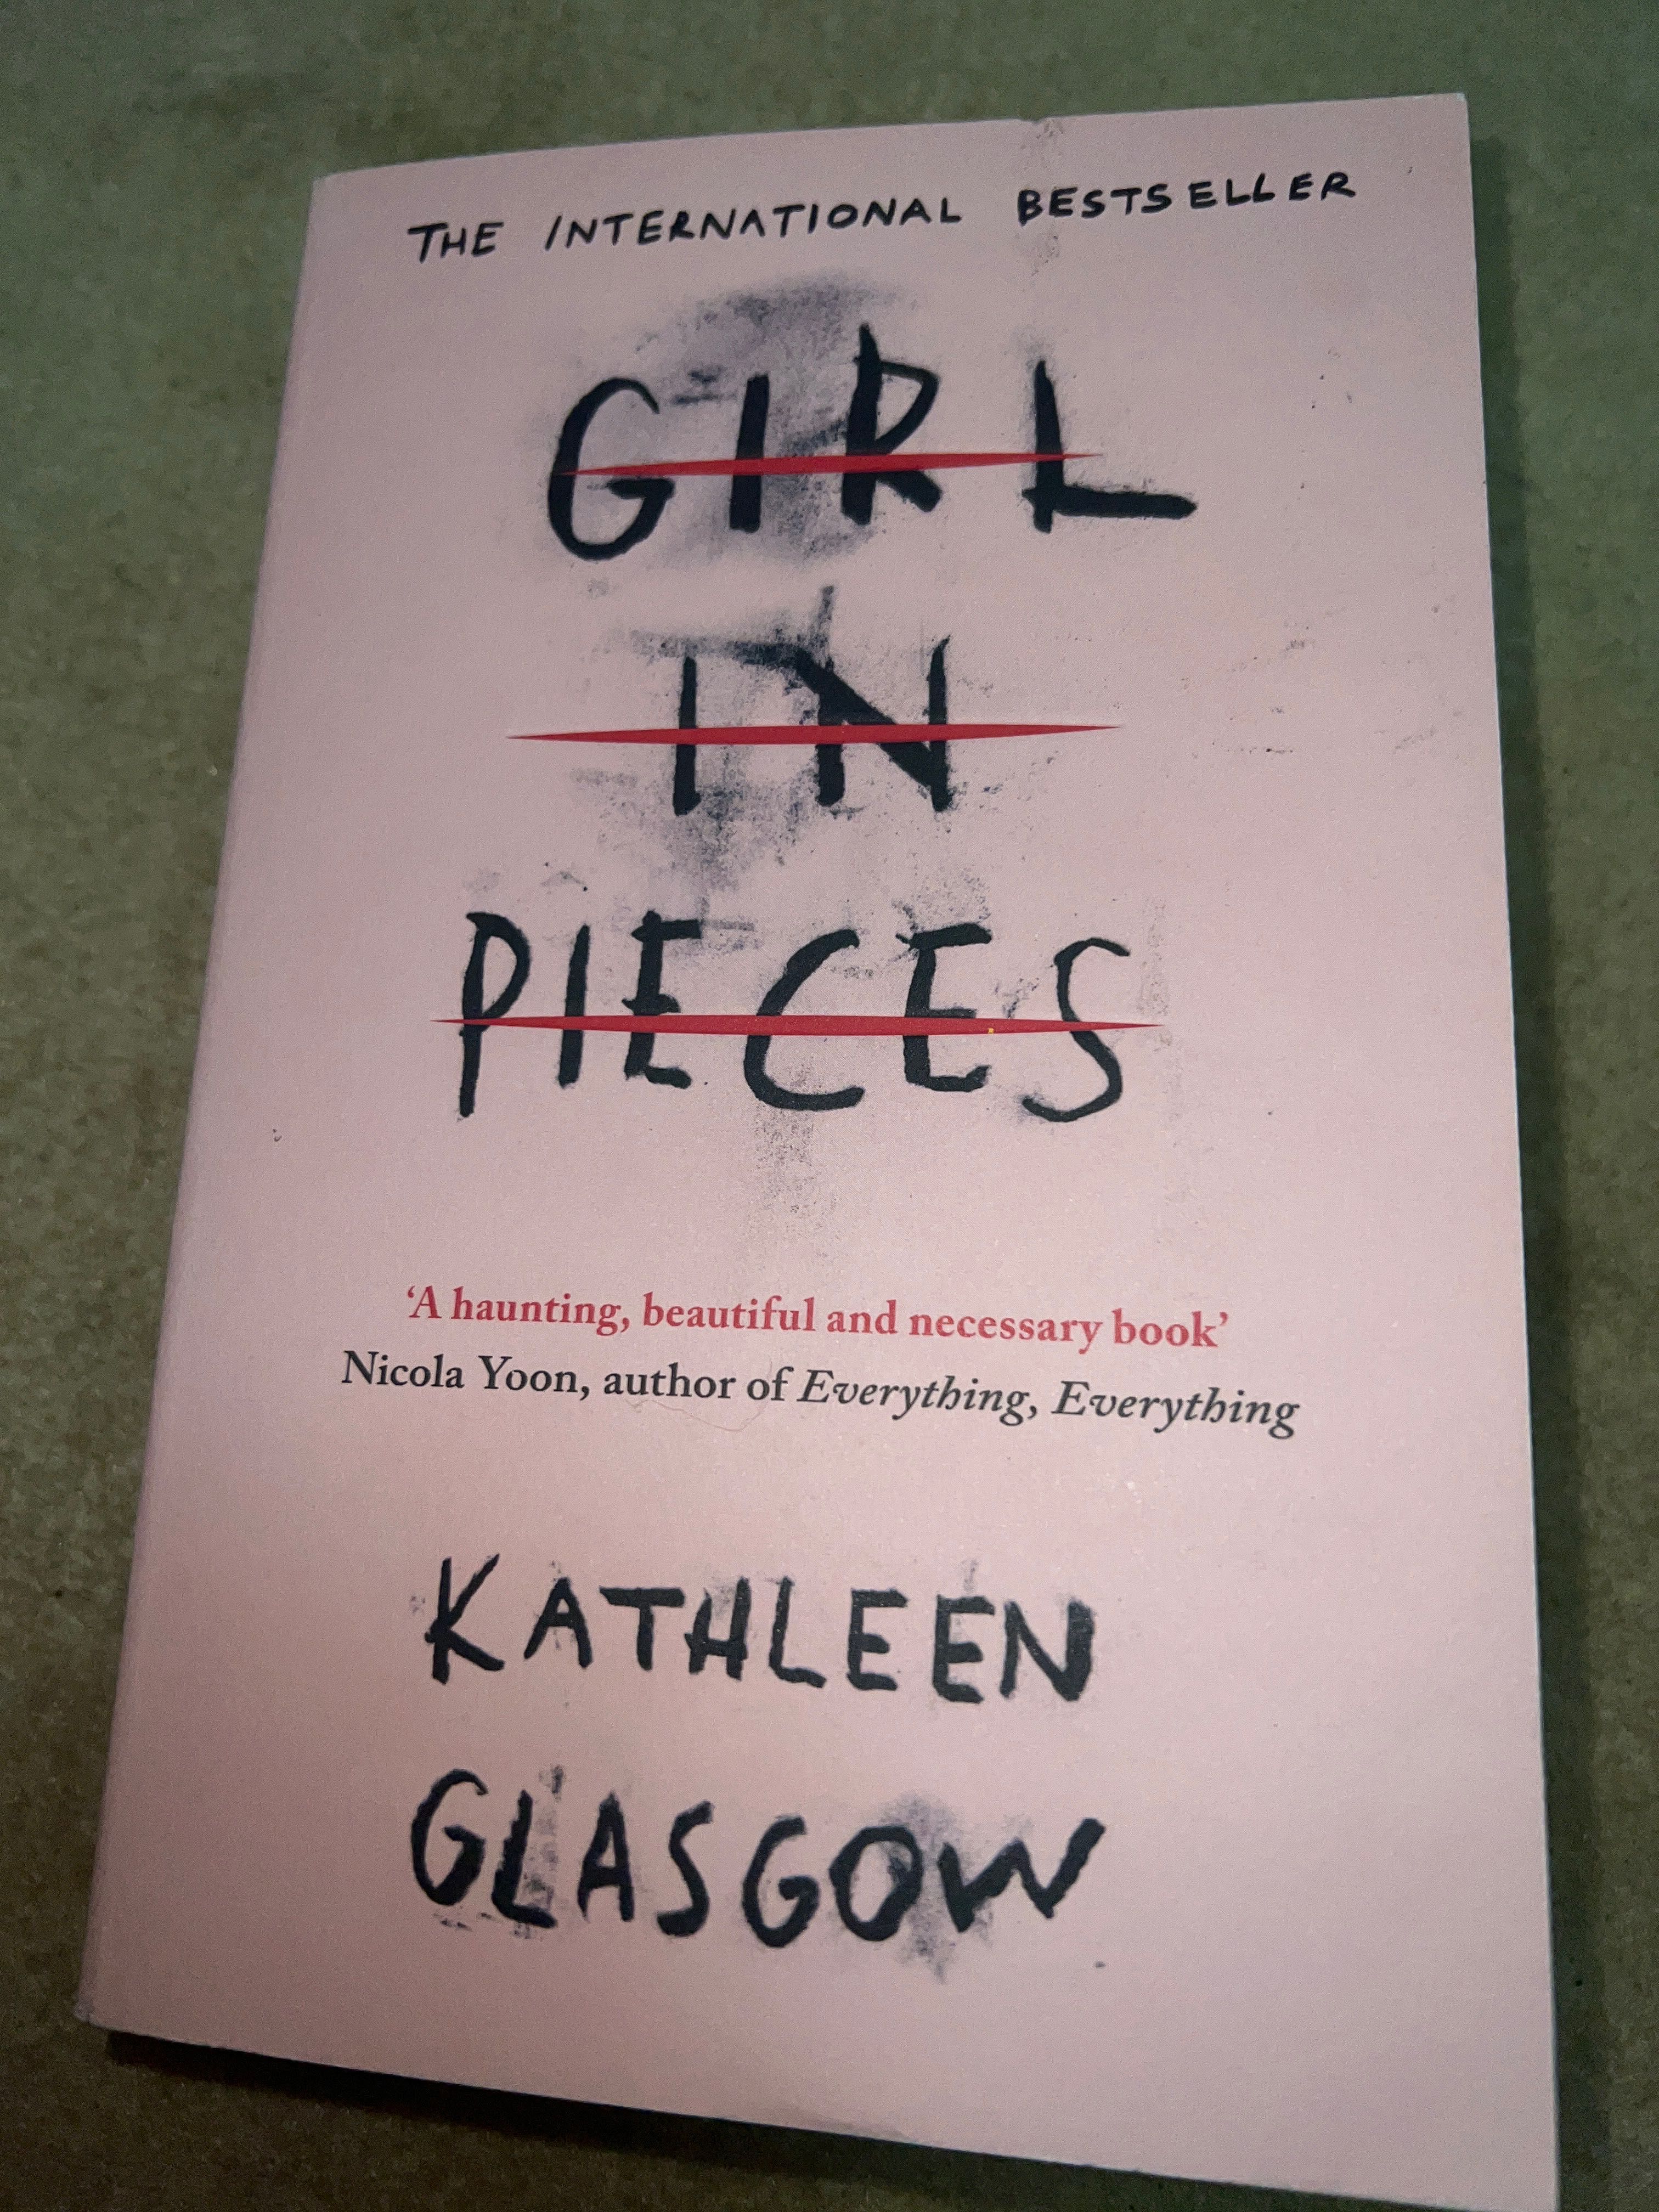 Girl in pieces - Kathleen Glasglow